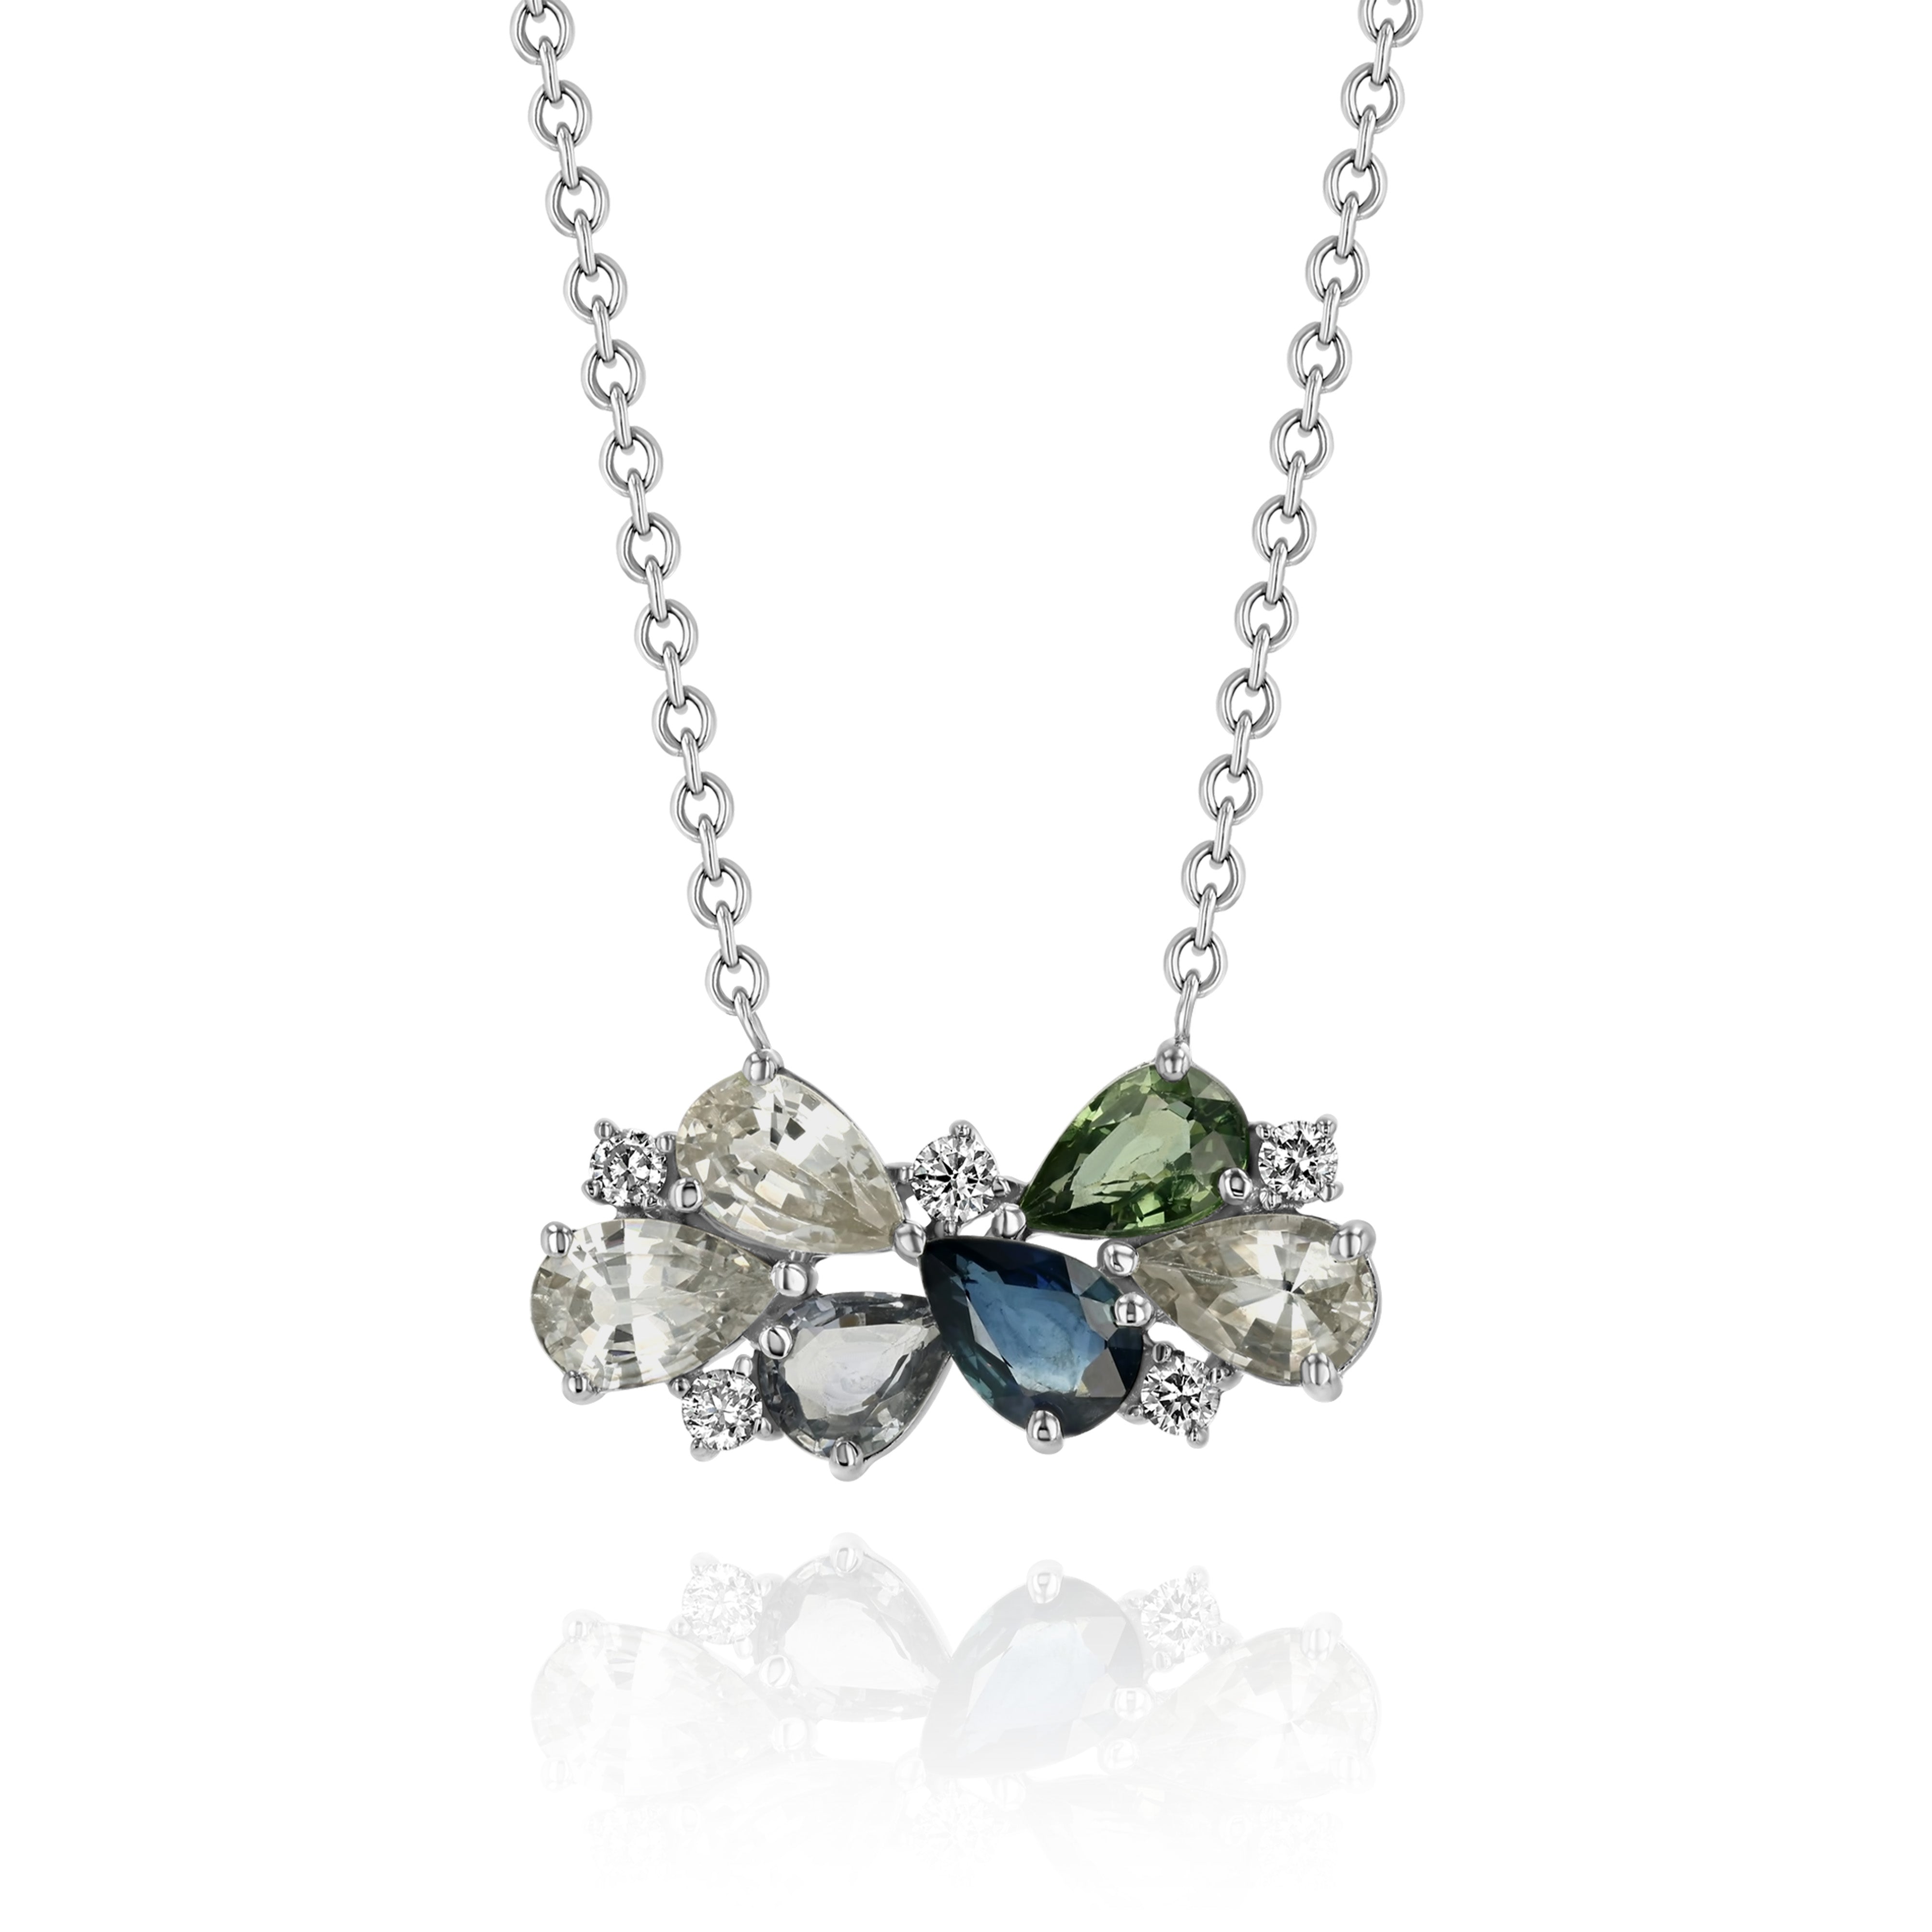 White Gold Necklace with Blue, Green, and White Sapphire, and Diamonds, Medium